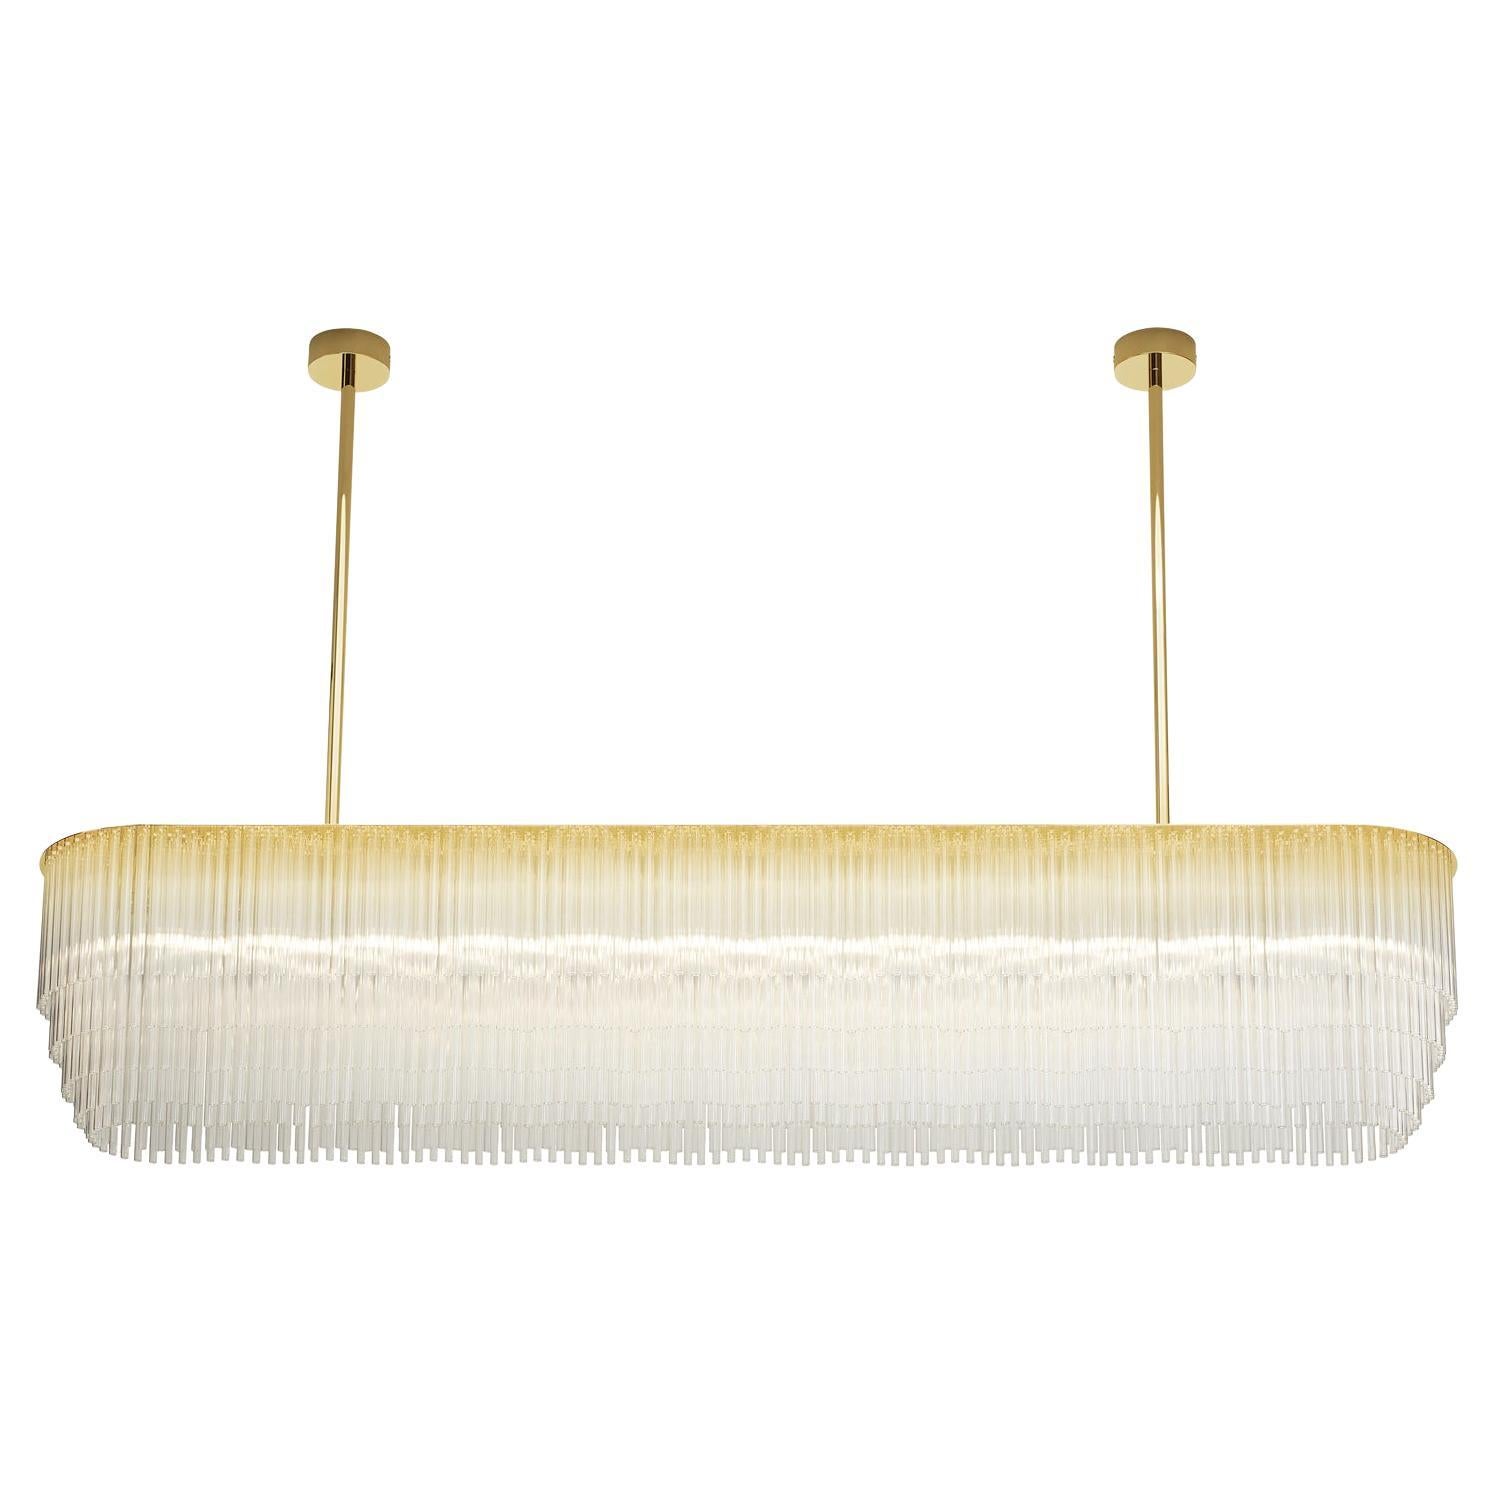 Linear Chandelier 1806mm / 71" in Polished Brass with Tiered Glass Profile